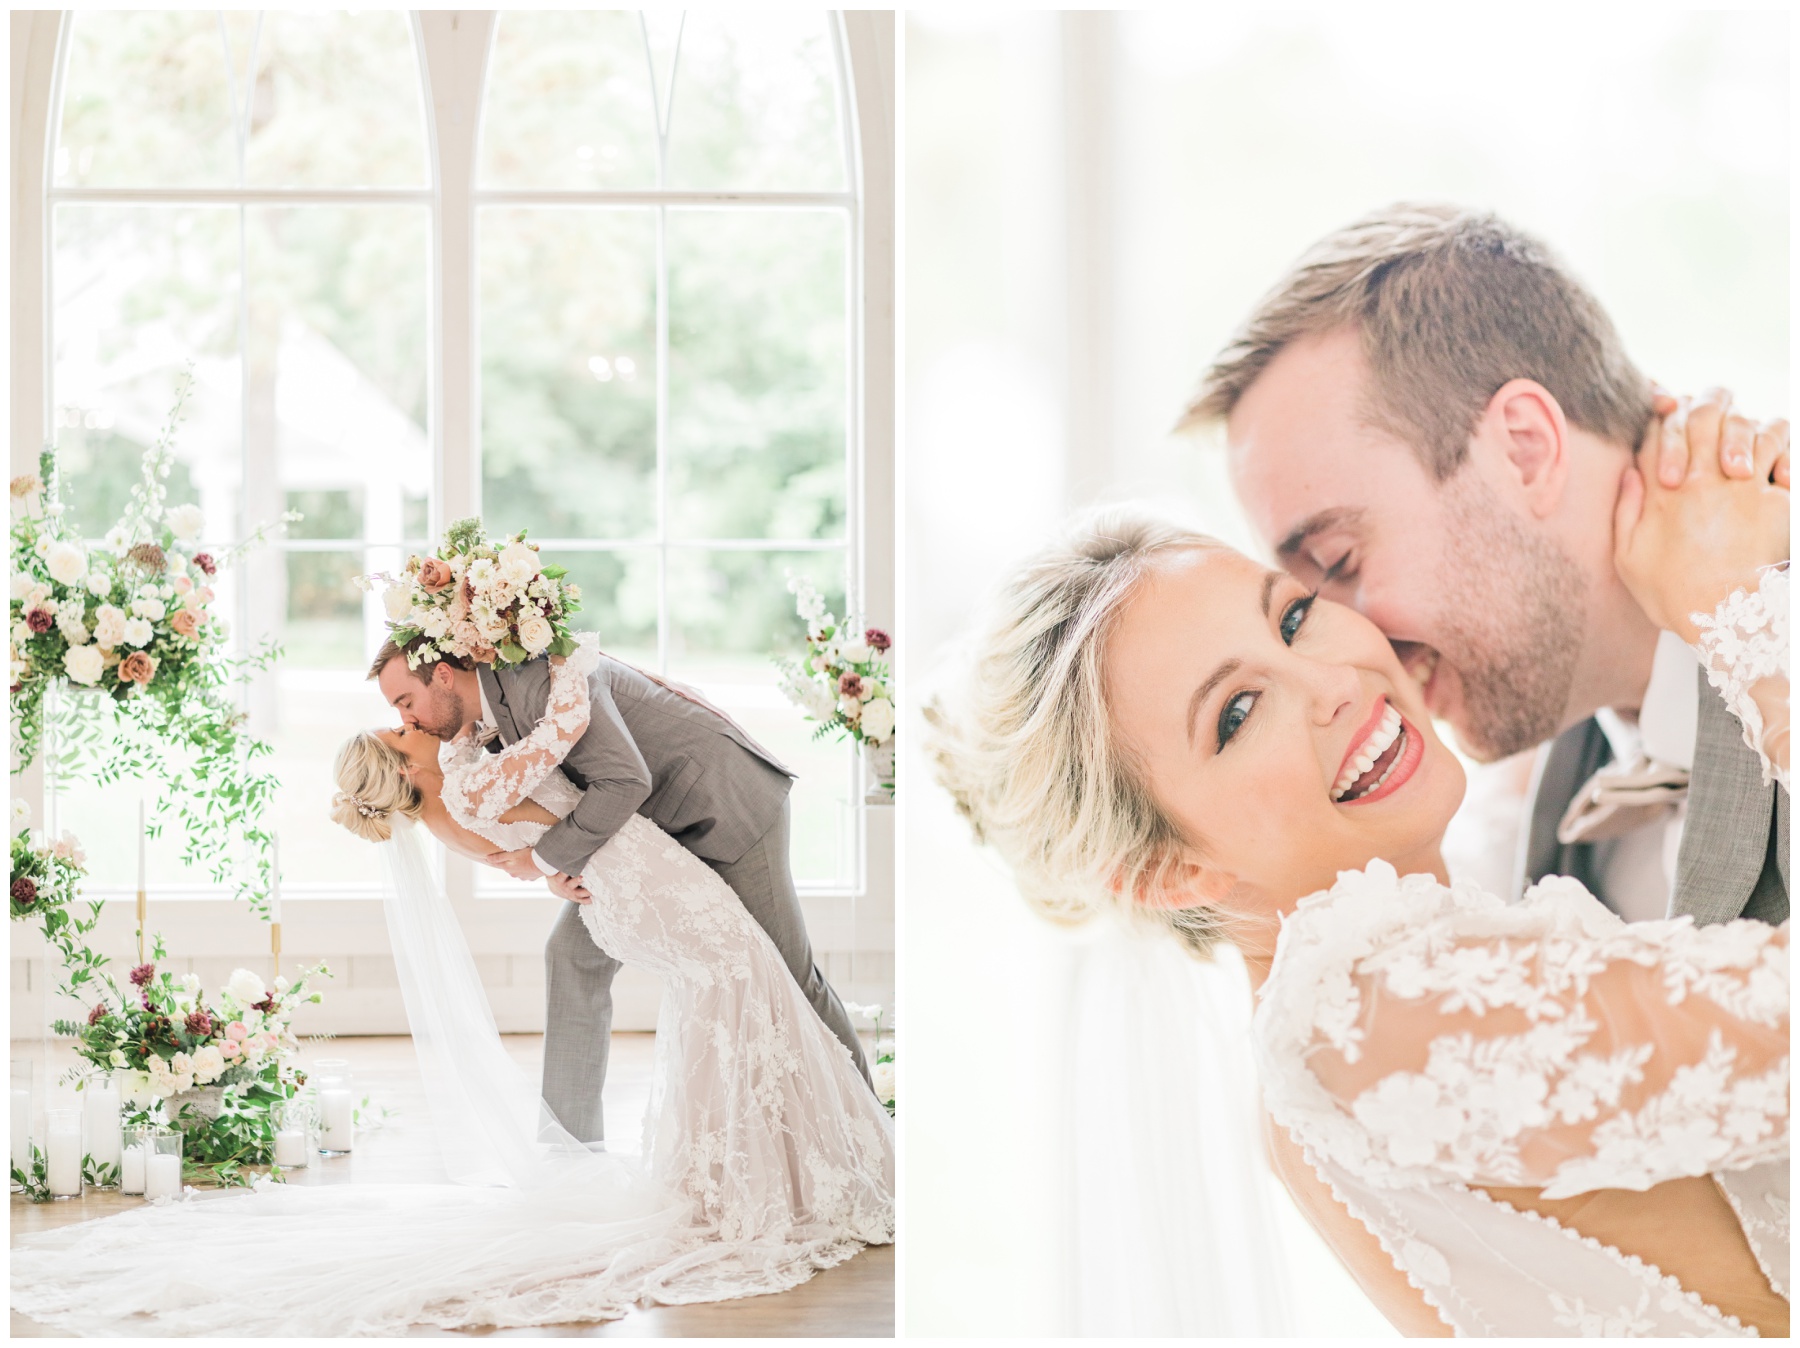 Indoor wedding ceremony at The Trinity Farmhouse at The Springs in Wallisville